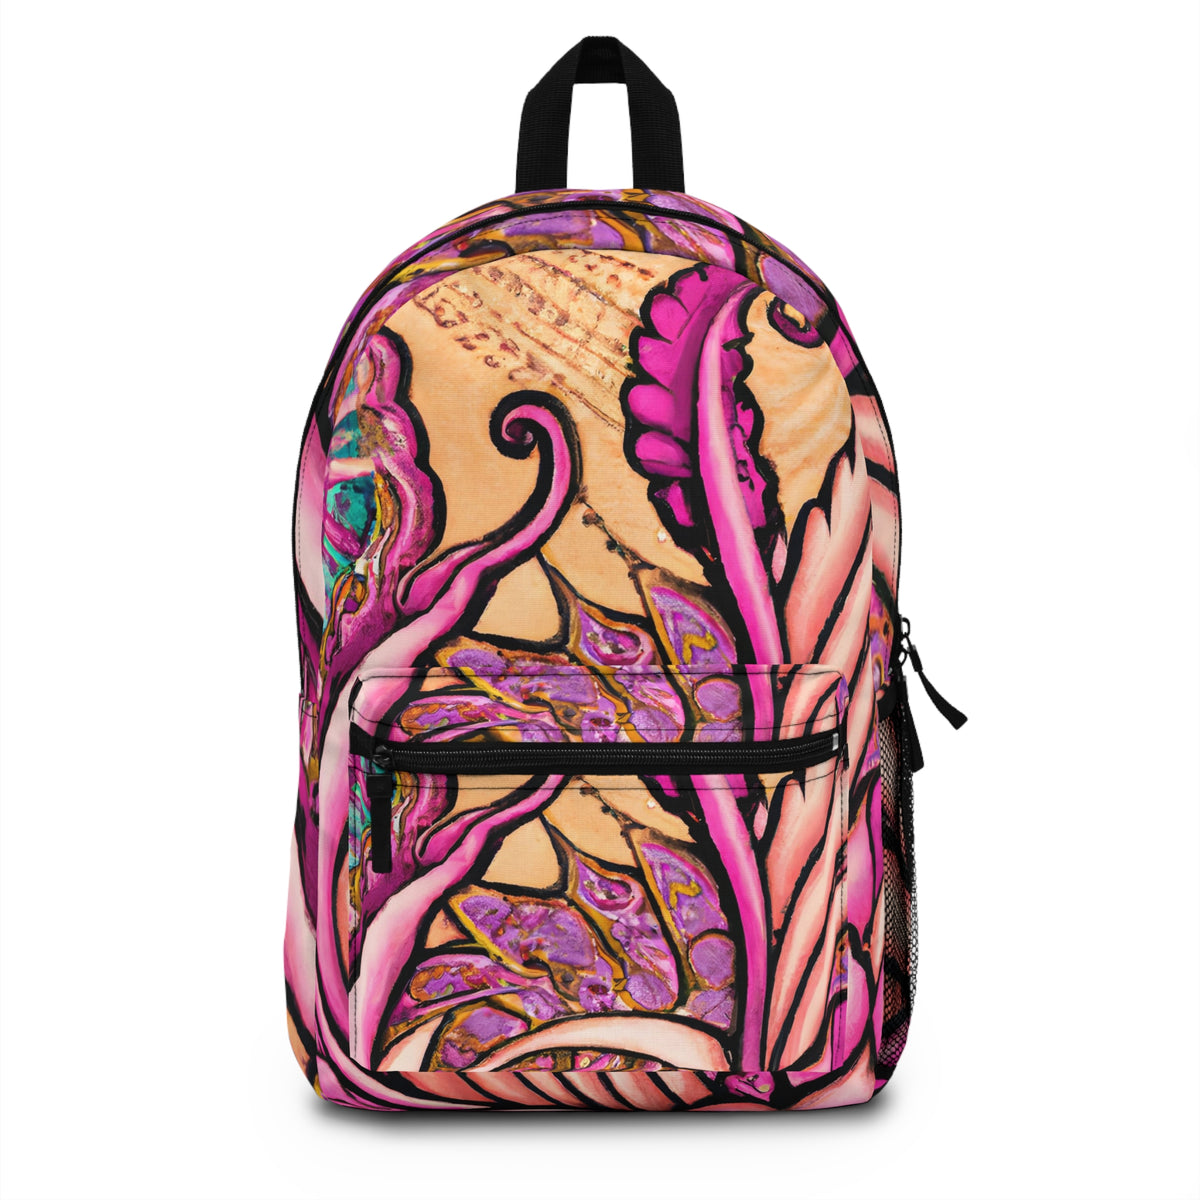 GlamourGal - Gay-Inspired Backpack